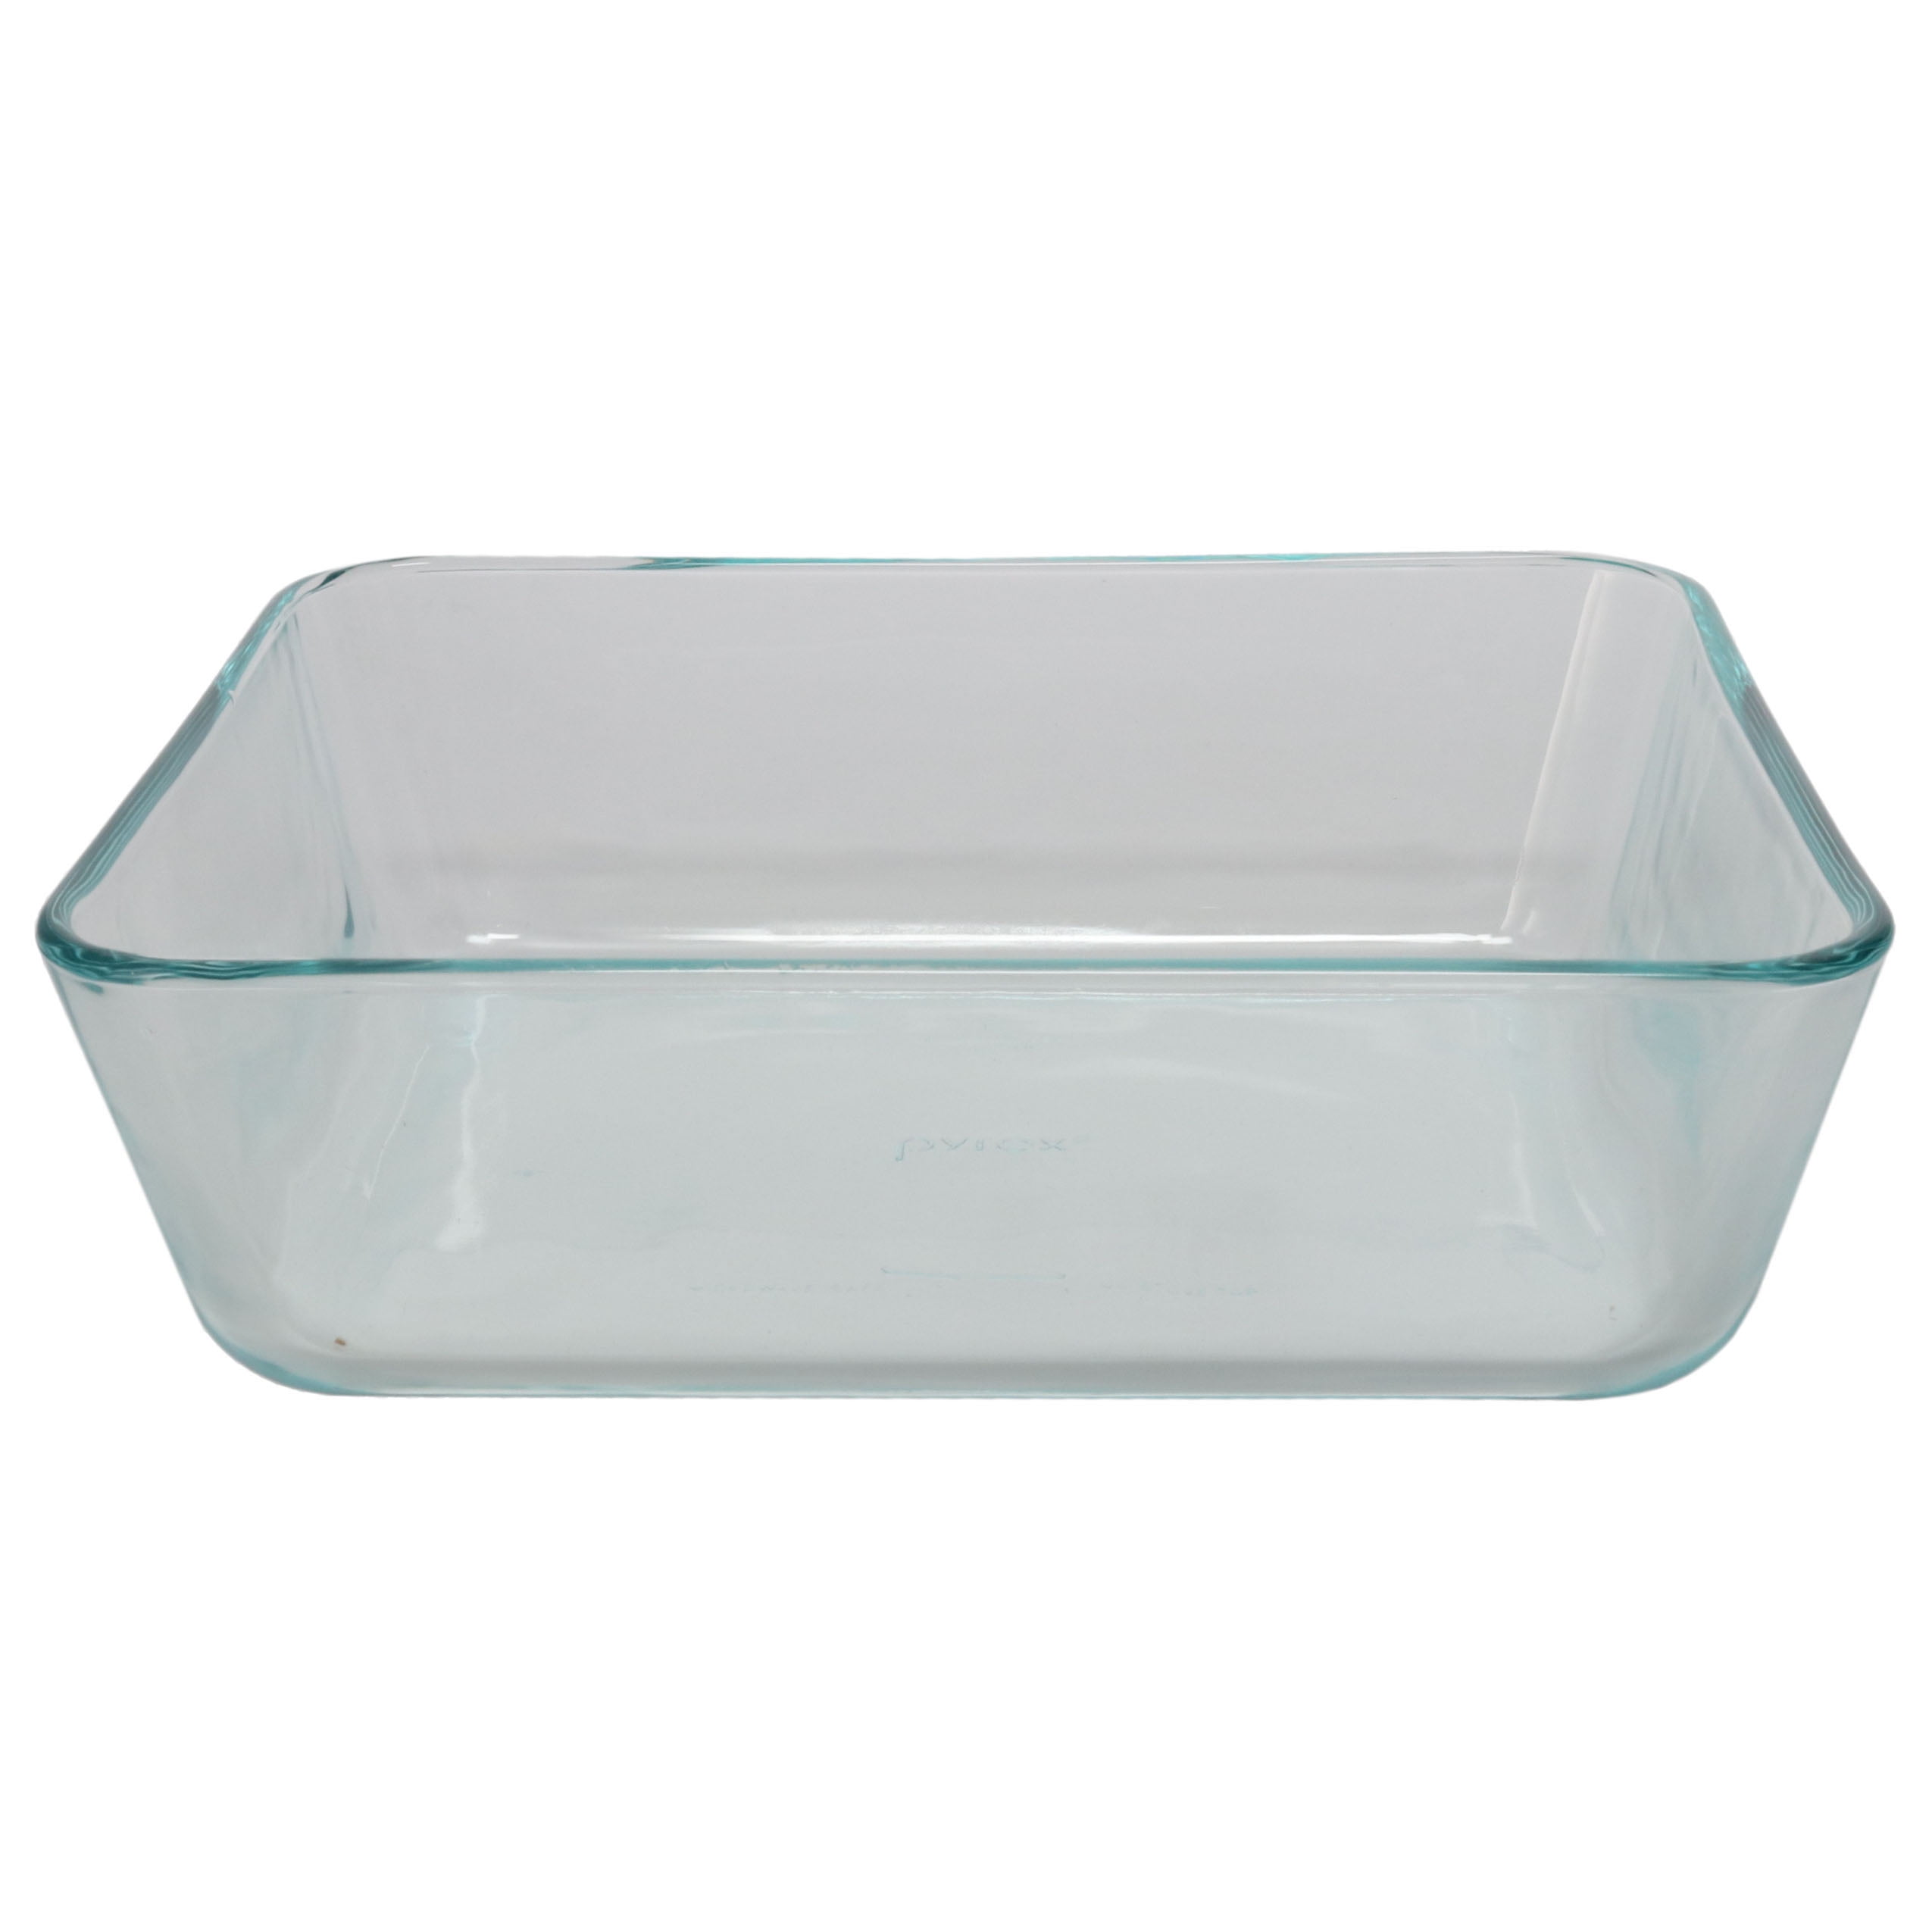 Pyrex (1) 7210 3-cup Glass Dish & (1) OV-7210 Ultimate White Glass